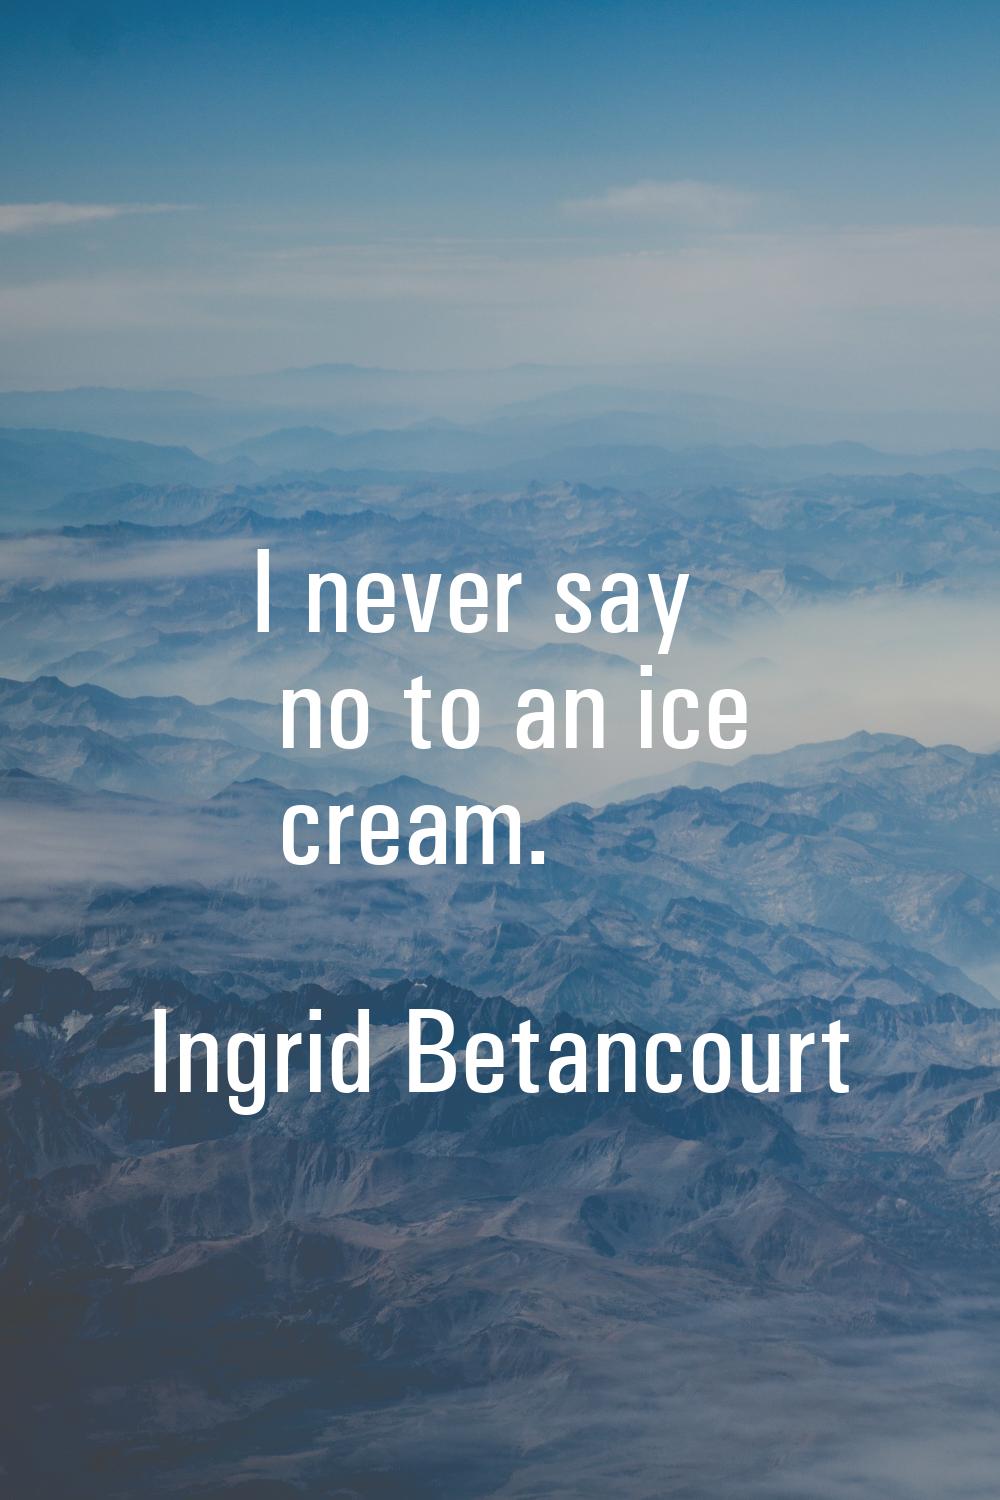 I never say no to an ice cream.